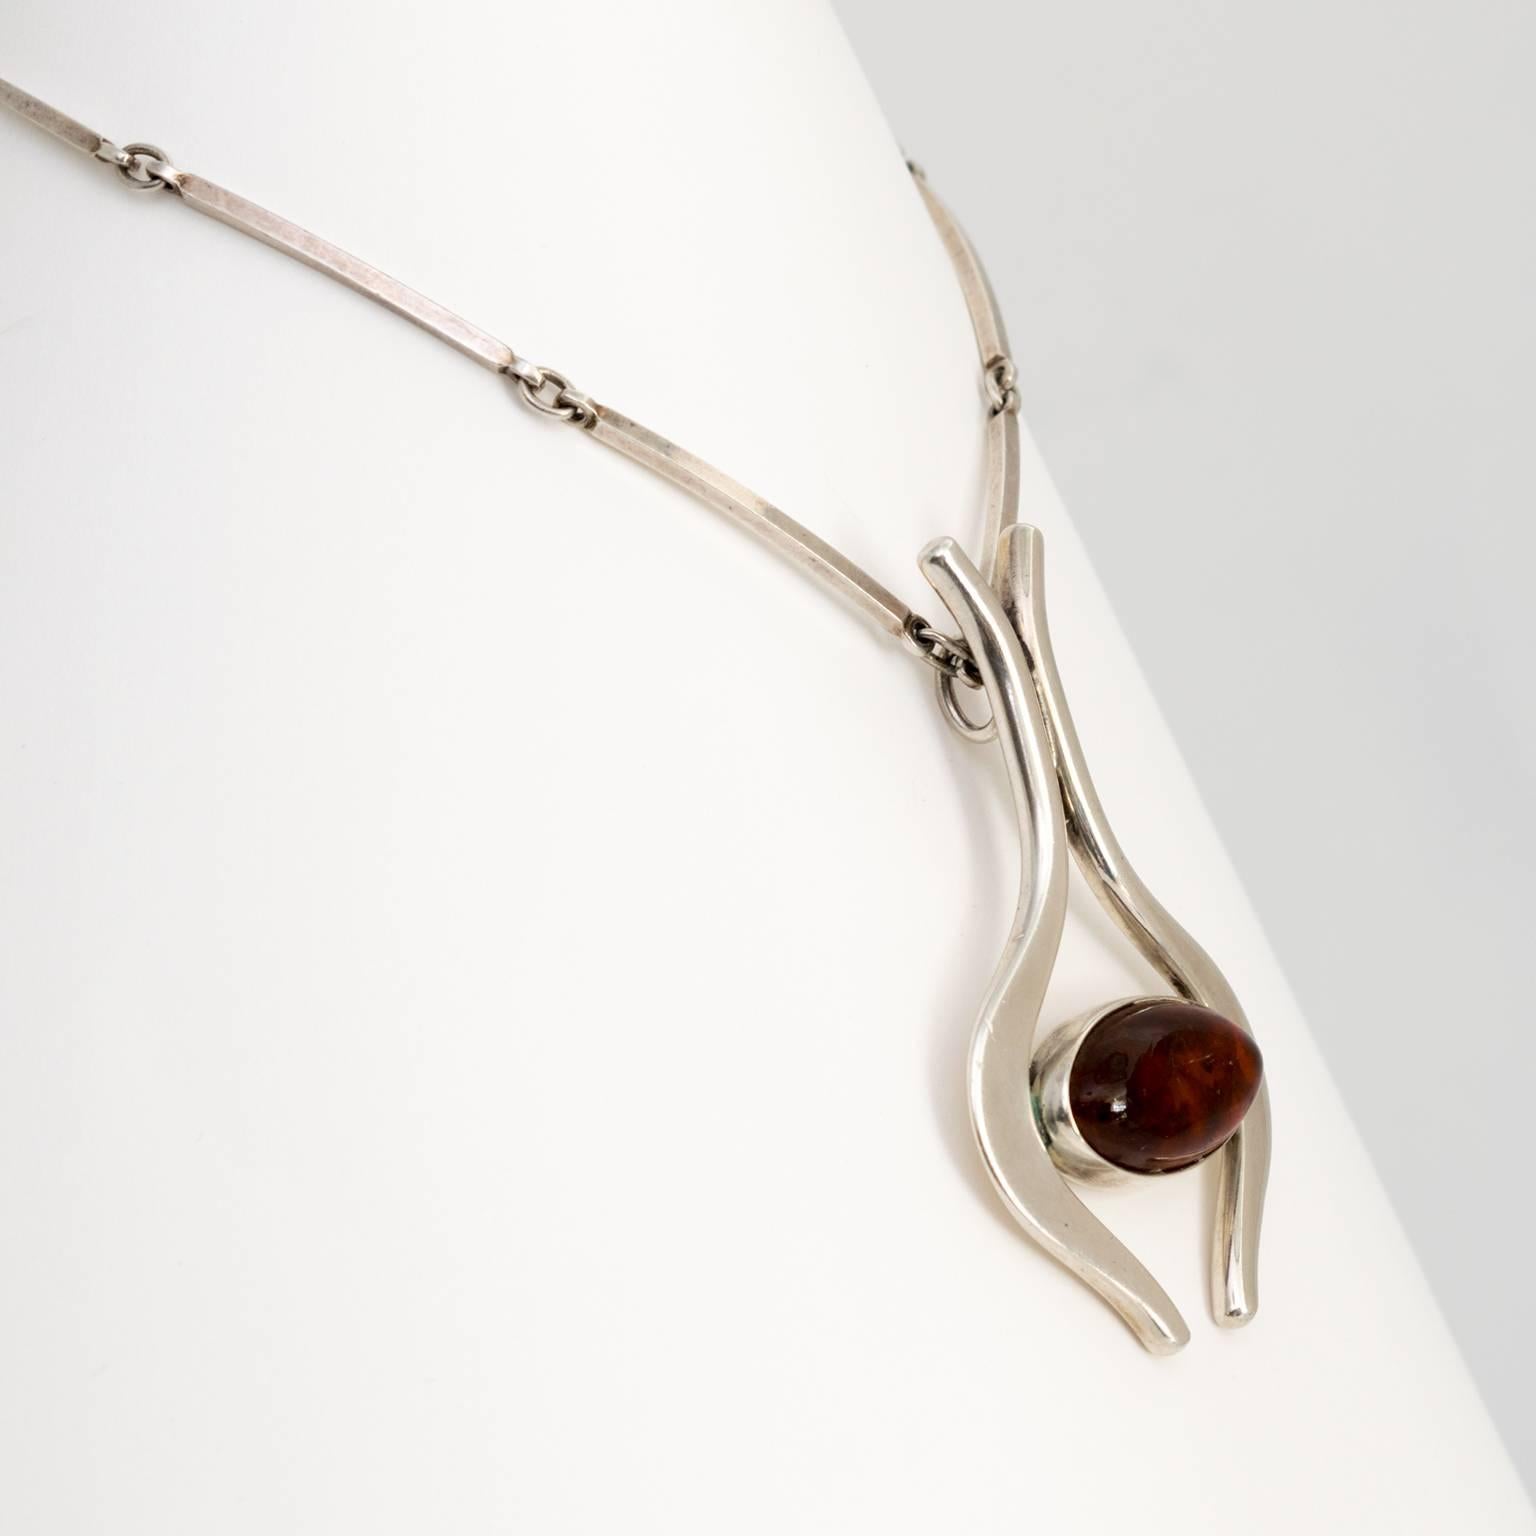 Scandinavian Modern Sterling silver necklace and pendant with cabochon in amber. Designed by Niels Erik From, Denmark, 1960s.
 
Total length: 12”, chain 10”, pendant 2.5”.
Pendant height: 2.75".